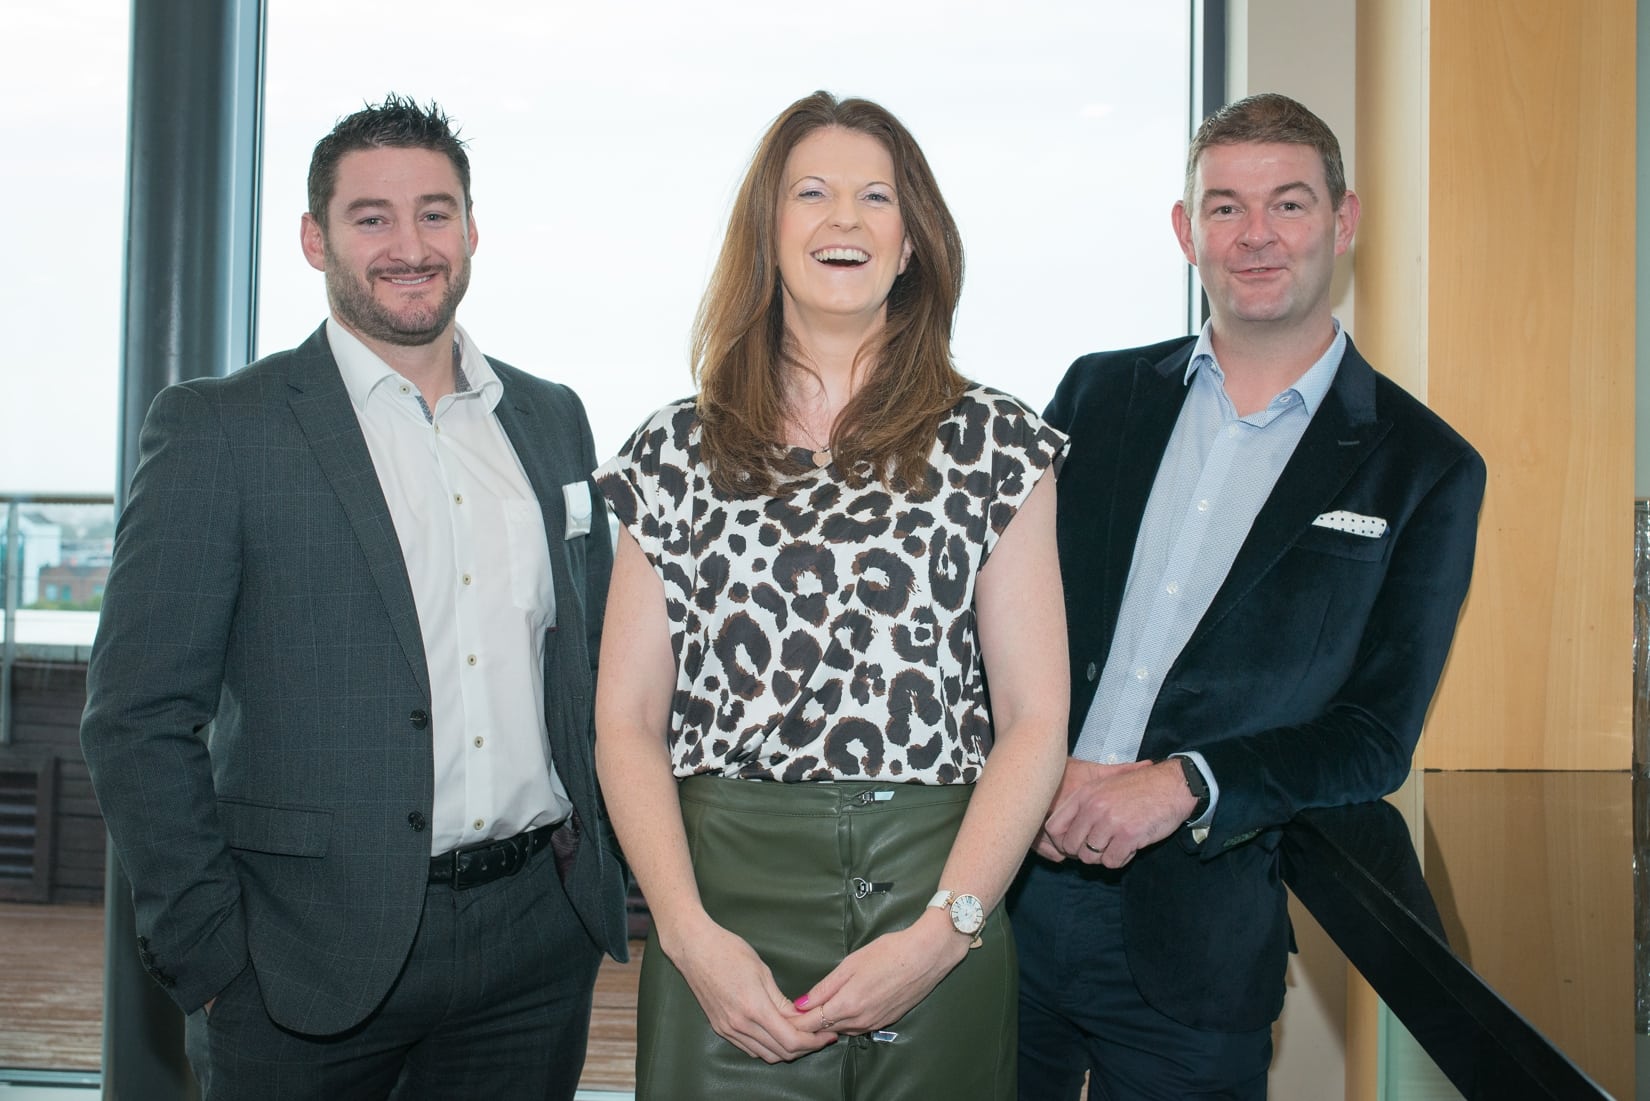 No repro fee-Business Excellence Seminar: Wealth Management. Event sponsored by AIB- 11-09-2018, From Left to Right: Keith Matthews, Caragh O'Shea and Carl Widger all from Metis Ireland. 
Photo credit Shauna Kennedy